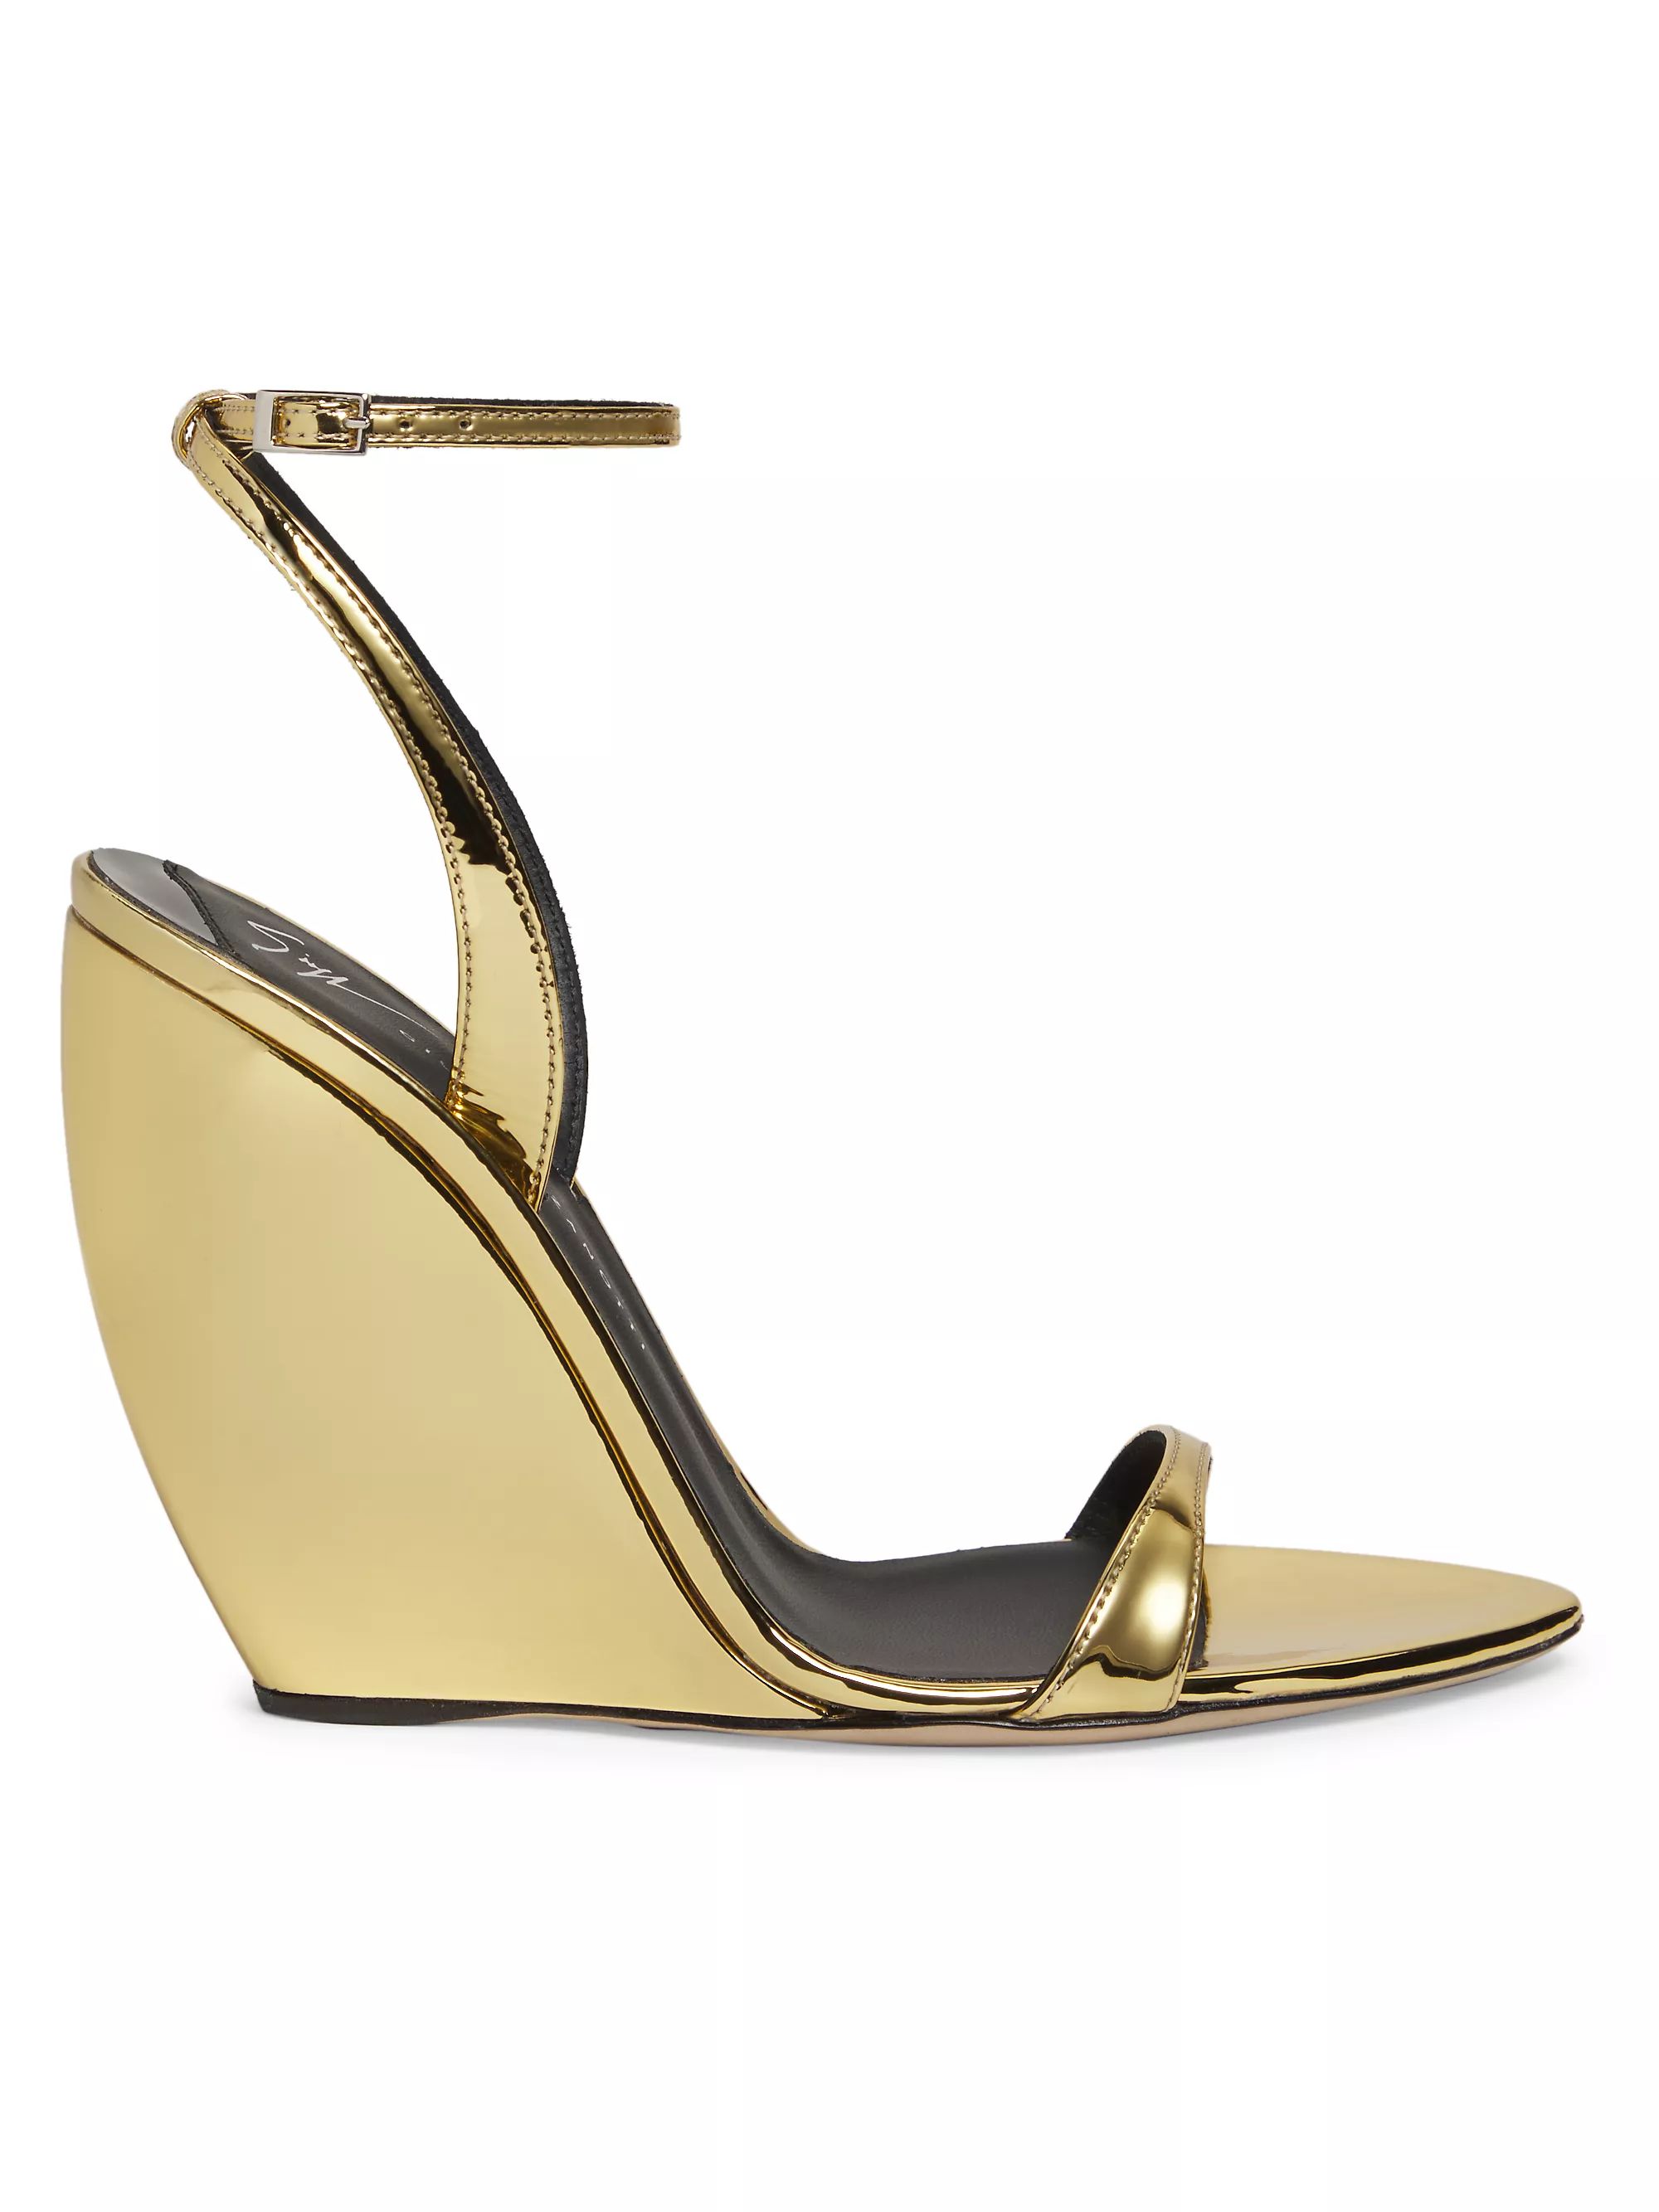 Metallic Patent Leather Wedge Sandals | Saks Fifth Avenue